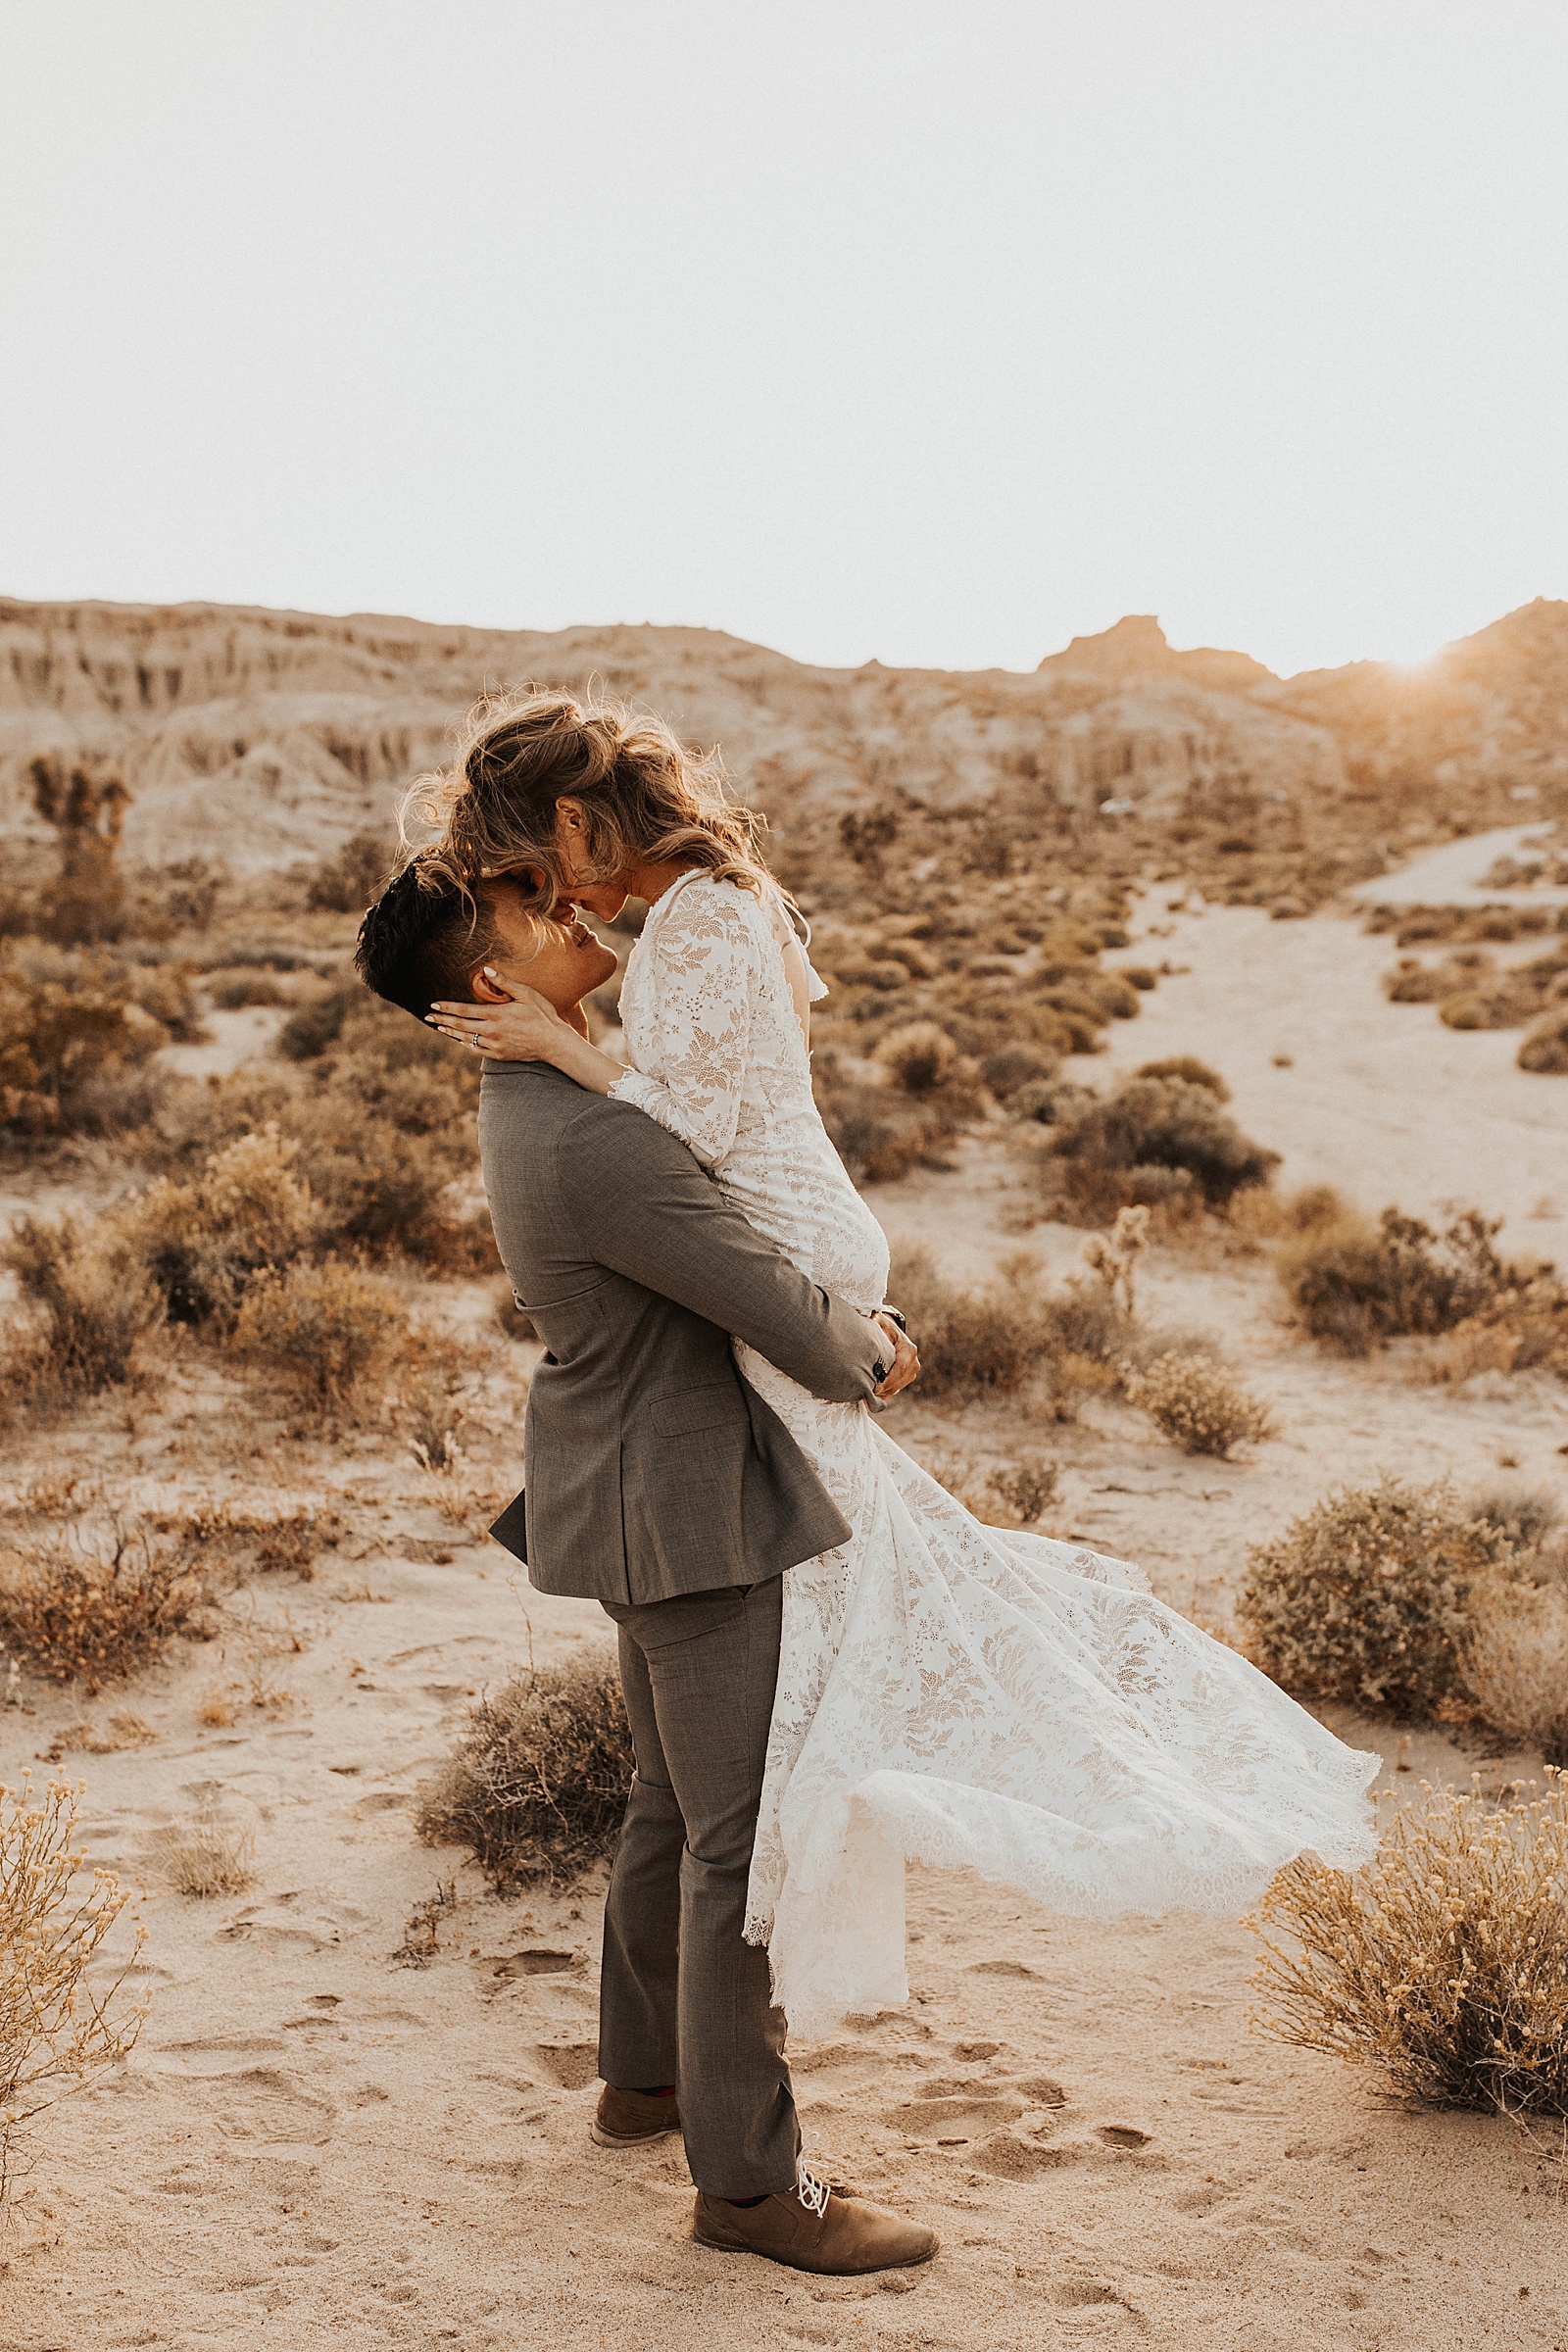 A bride and groom photo at the Red Rock Canyon in California.